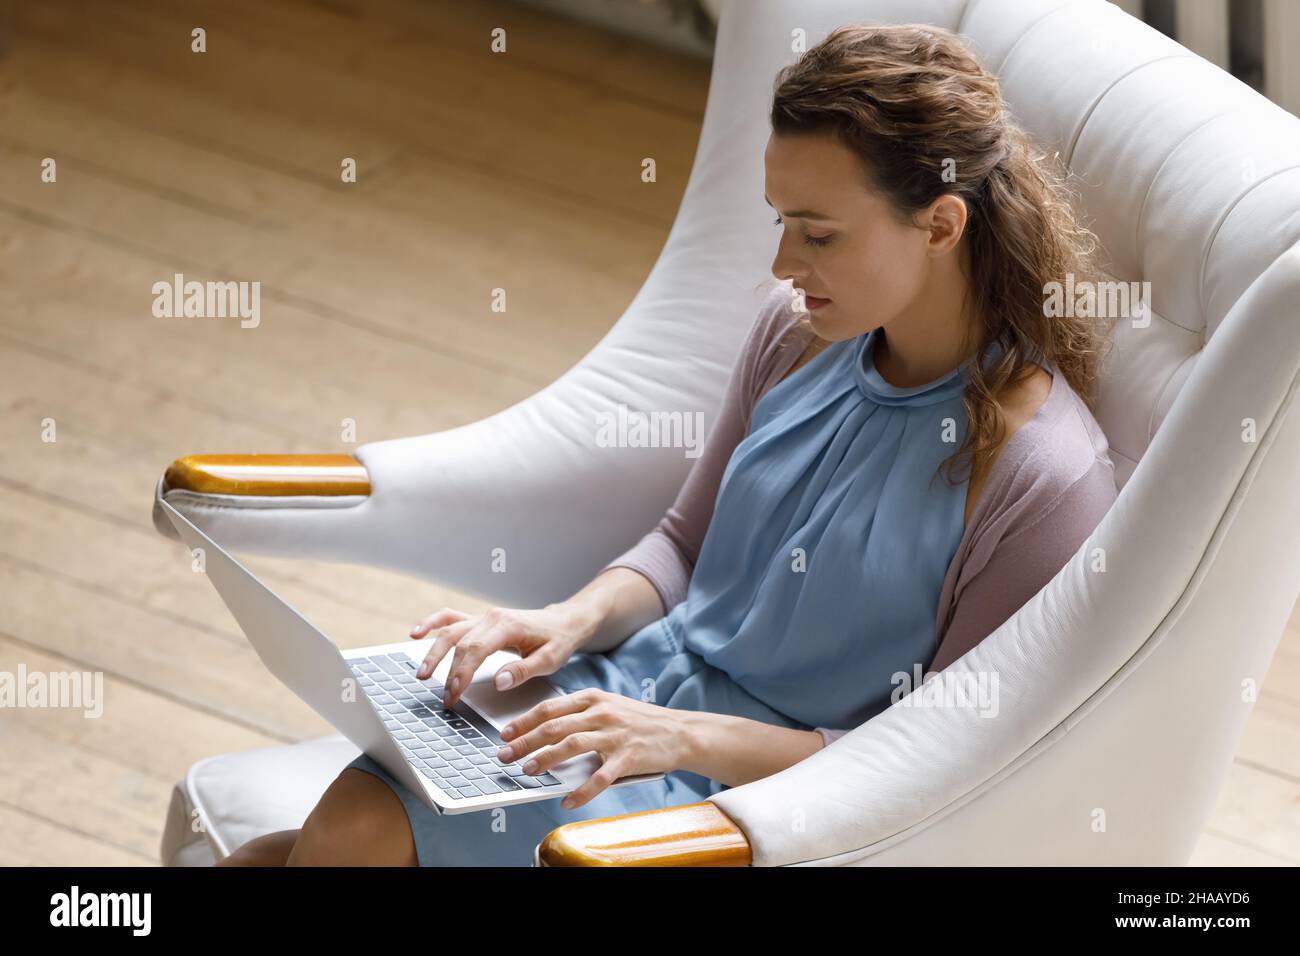 Focused young woman typing on laptop, resting in comfortable armchair Stock Photo